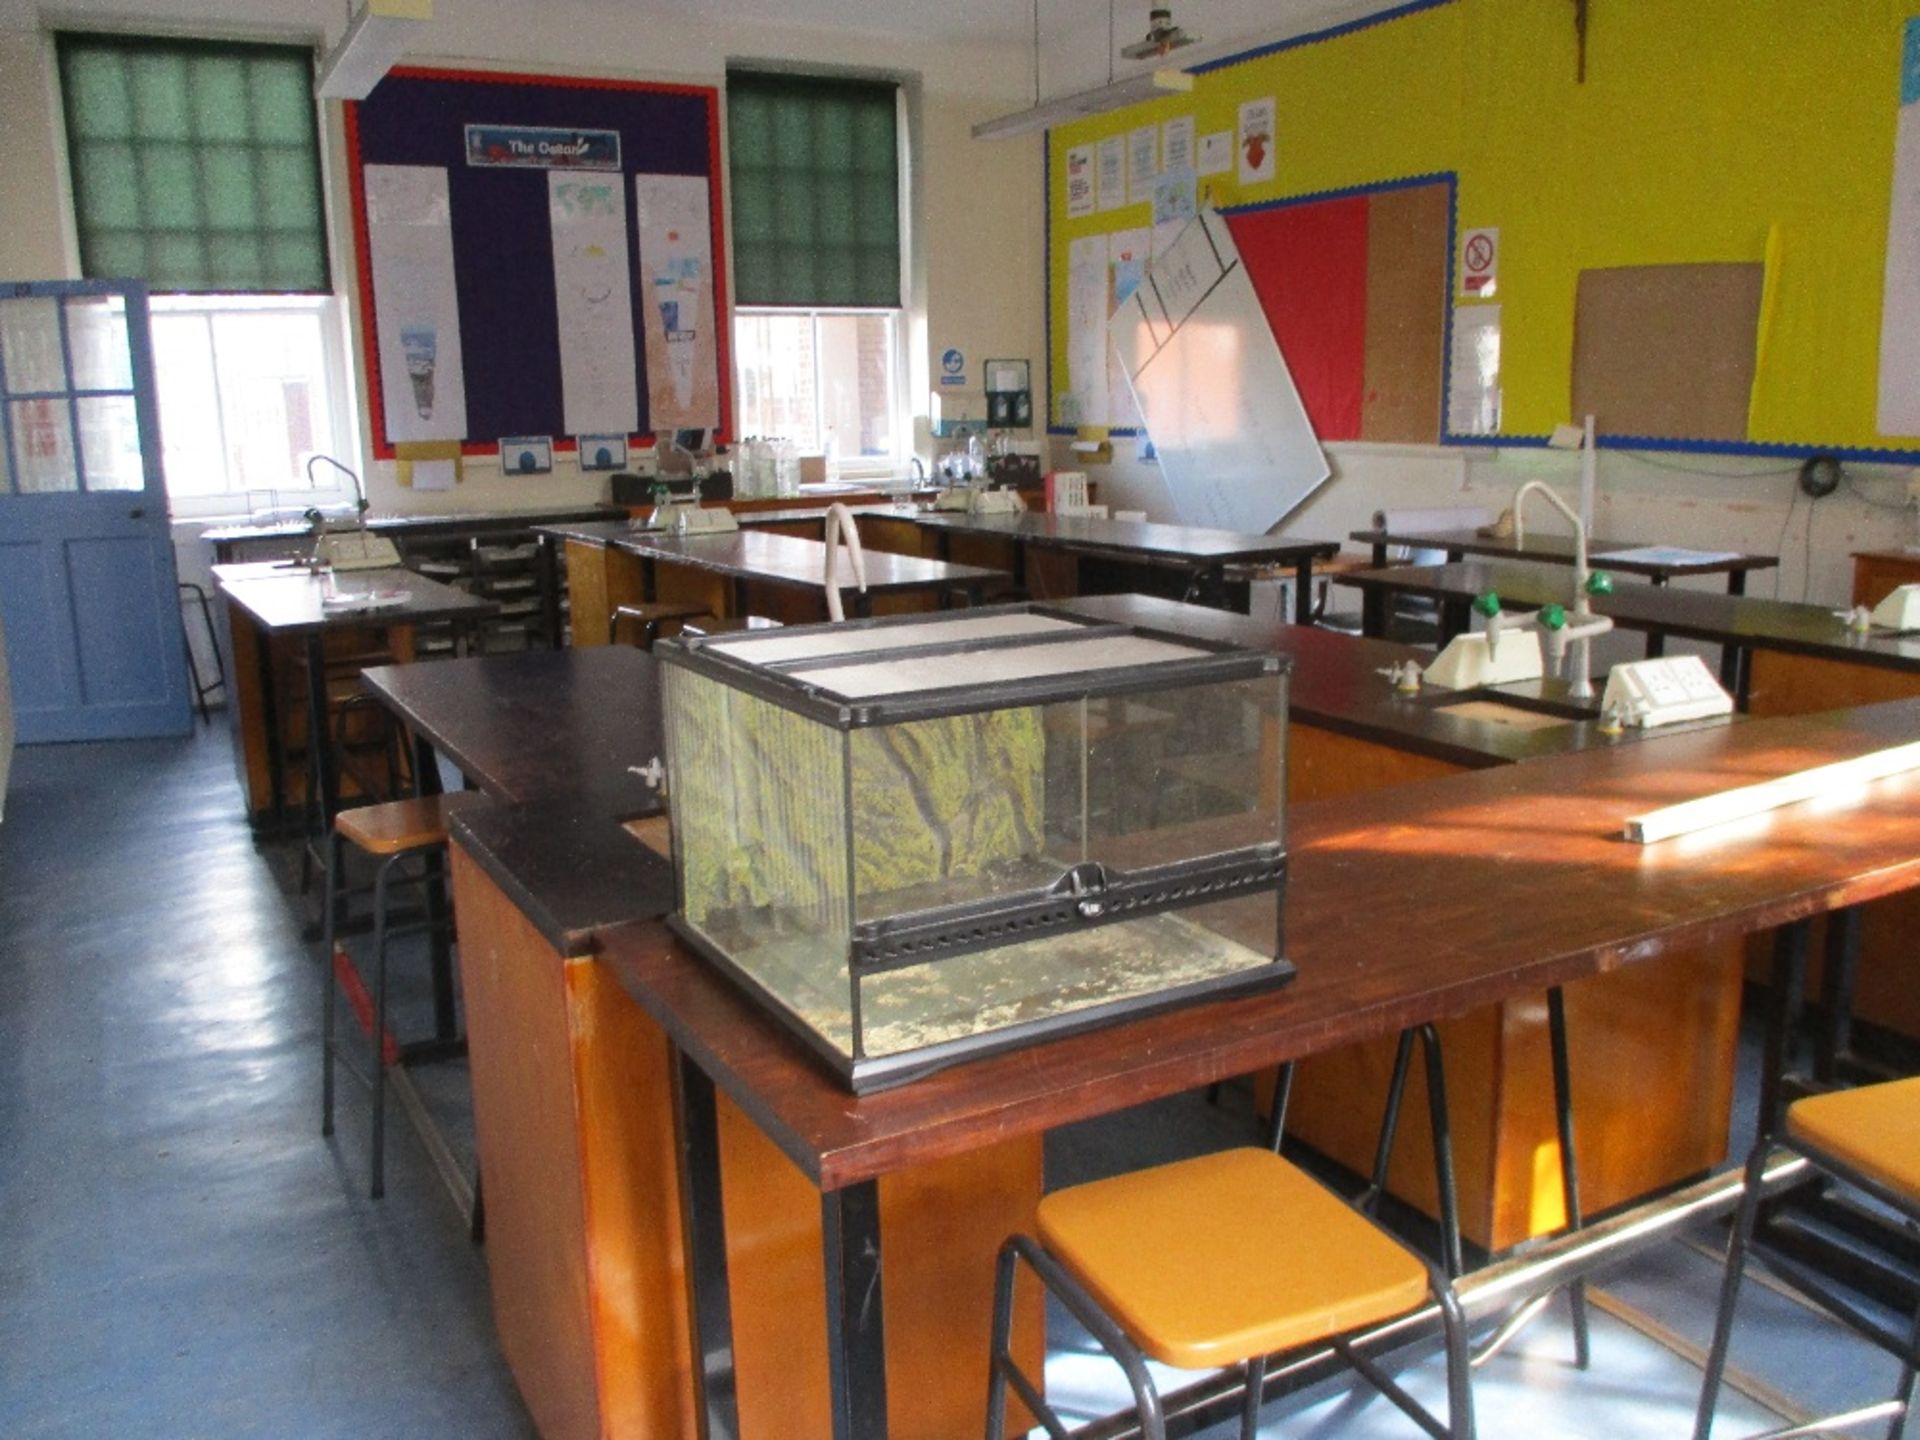 Contents of Classroom L3 - Image 2 of 4